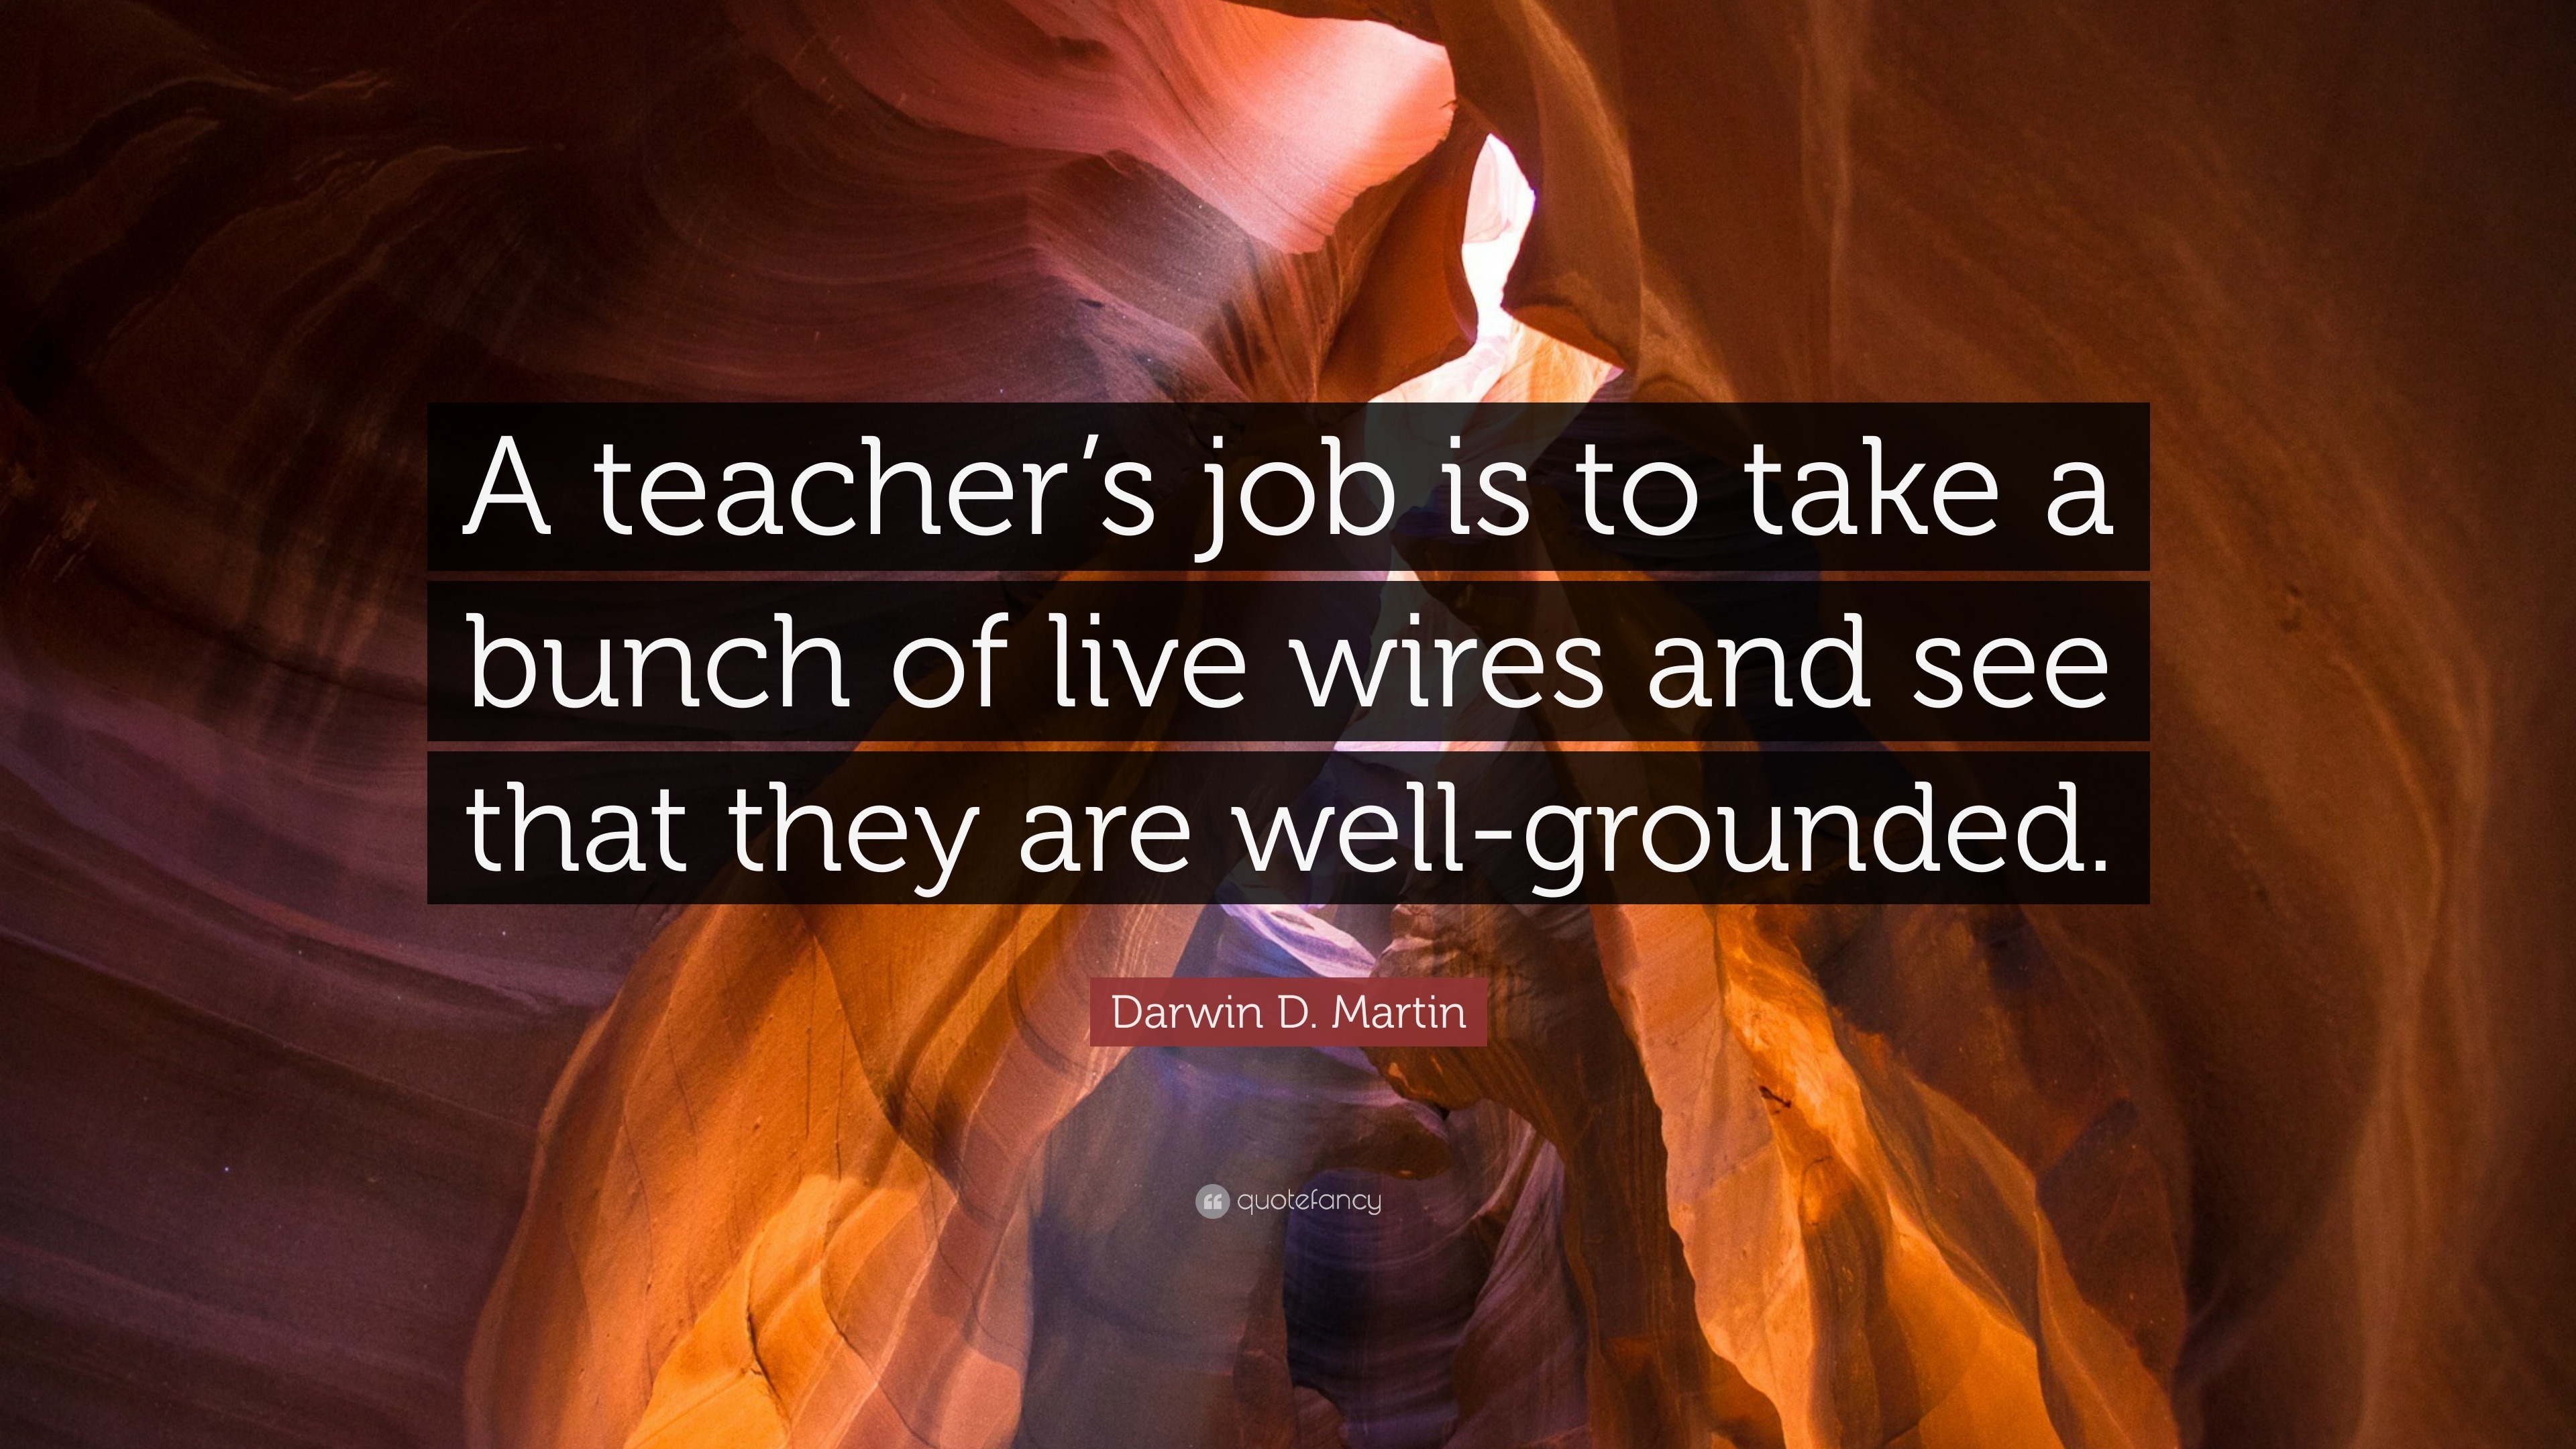 Darwin D. Martin Quote: “A teacher’s job is to take a bunch of live